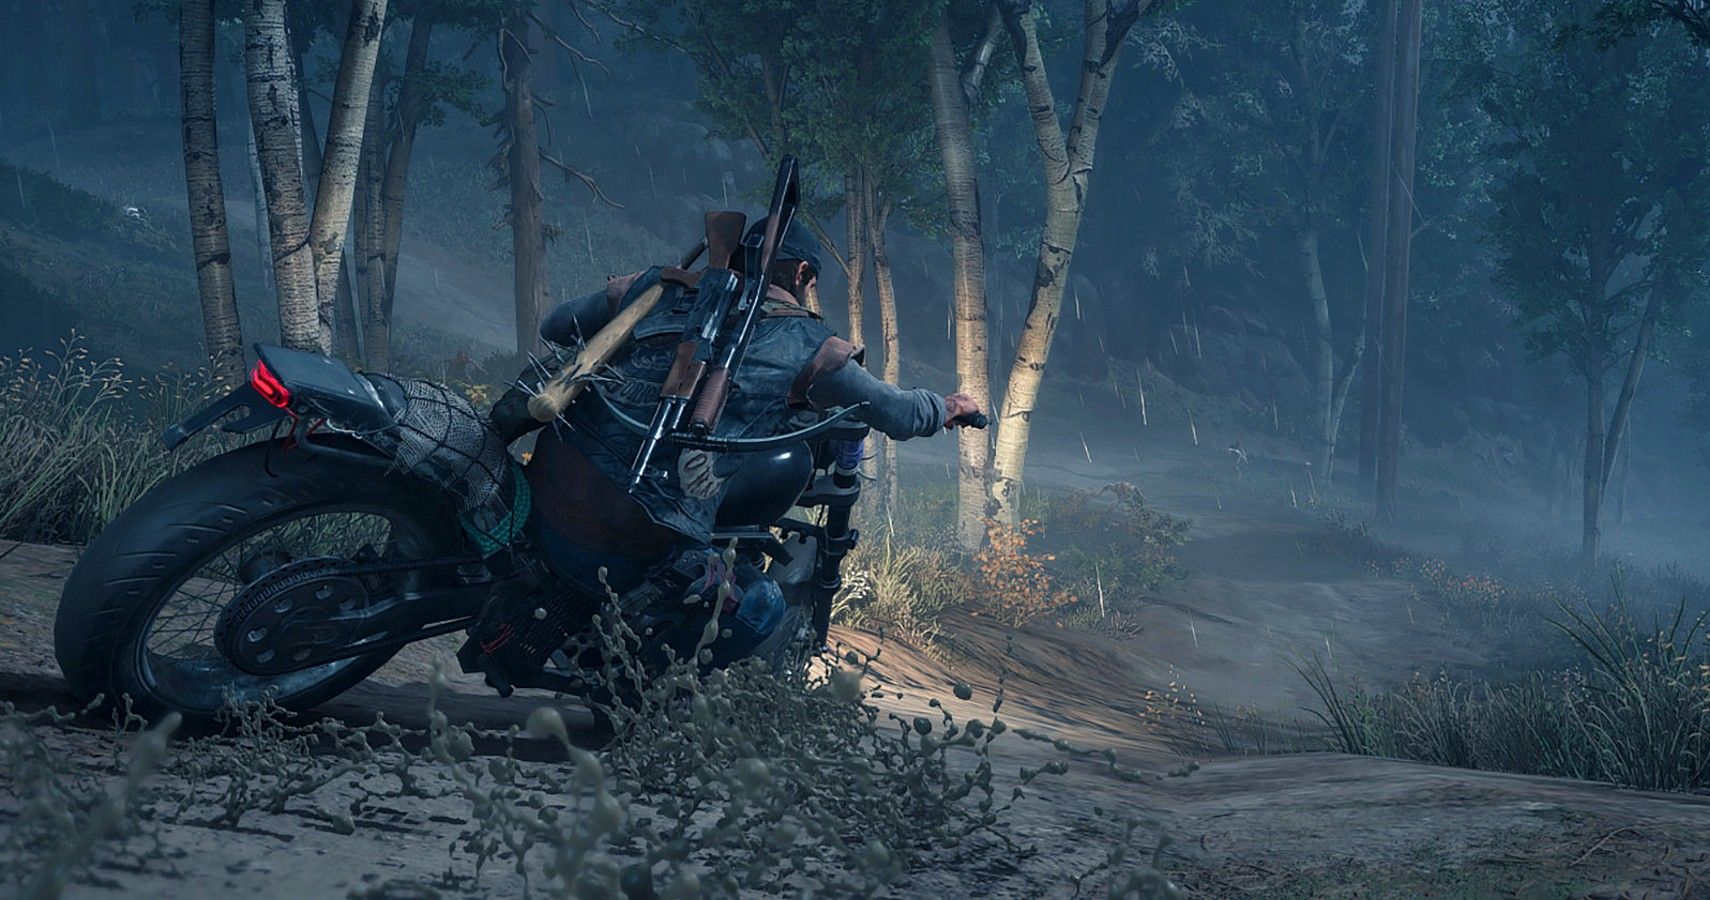 Days Gone 2 Petition Reaches Nearly 80,000 Signatures